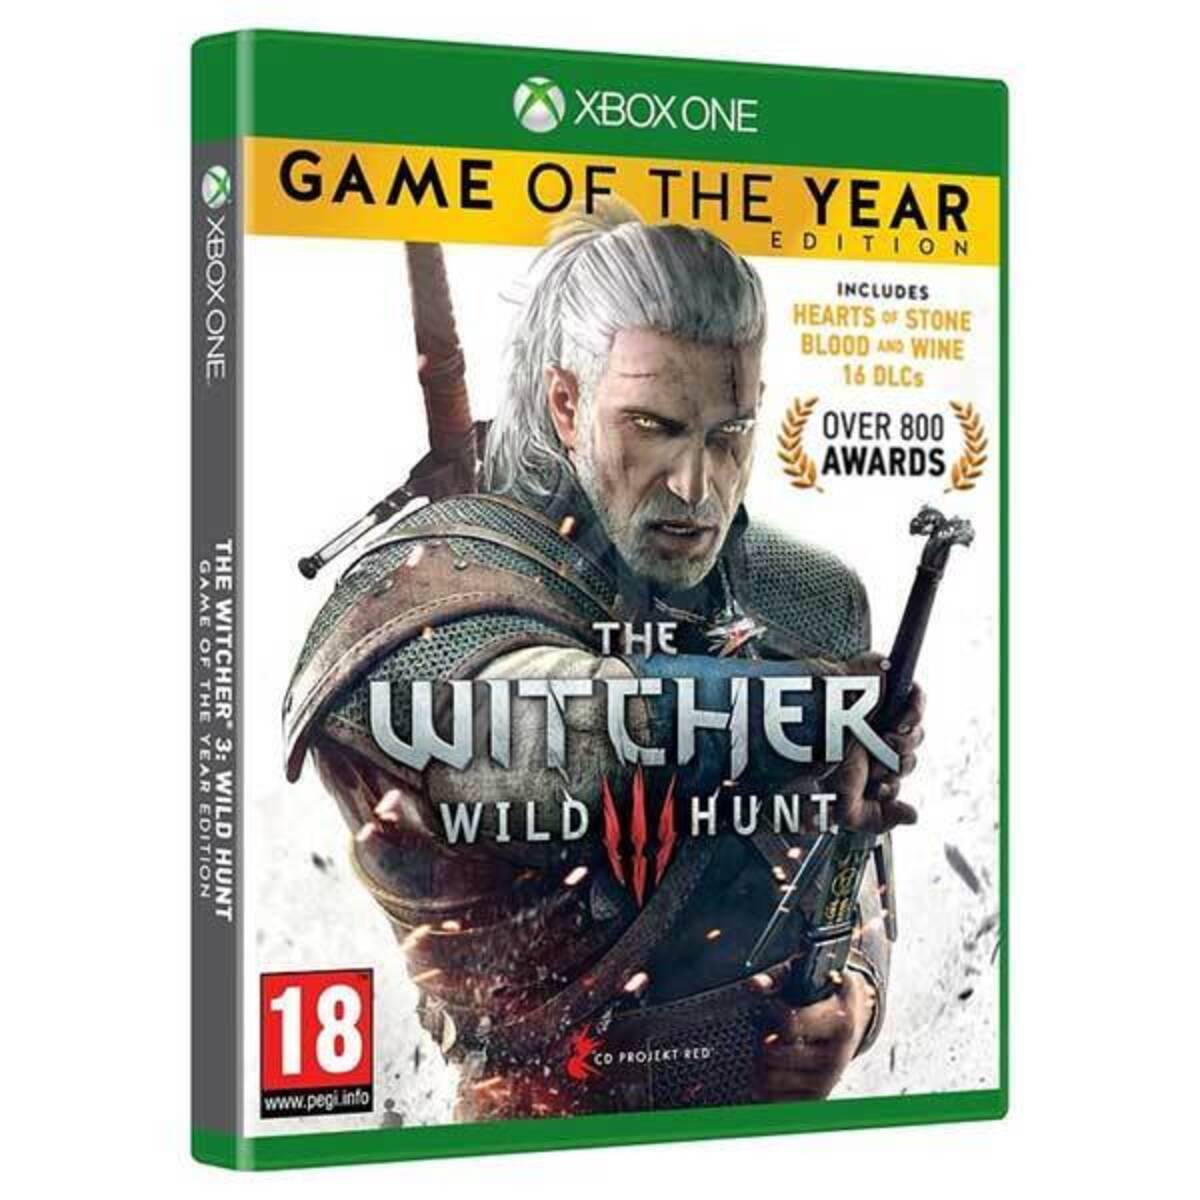 Image of Witcher 3: Wild Hunt - Game of the Year Edition - Xbox One